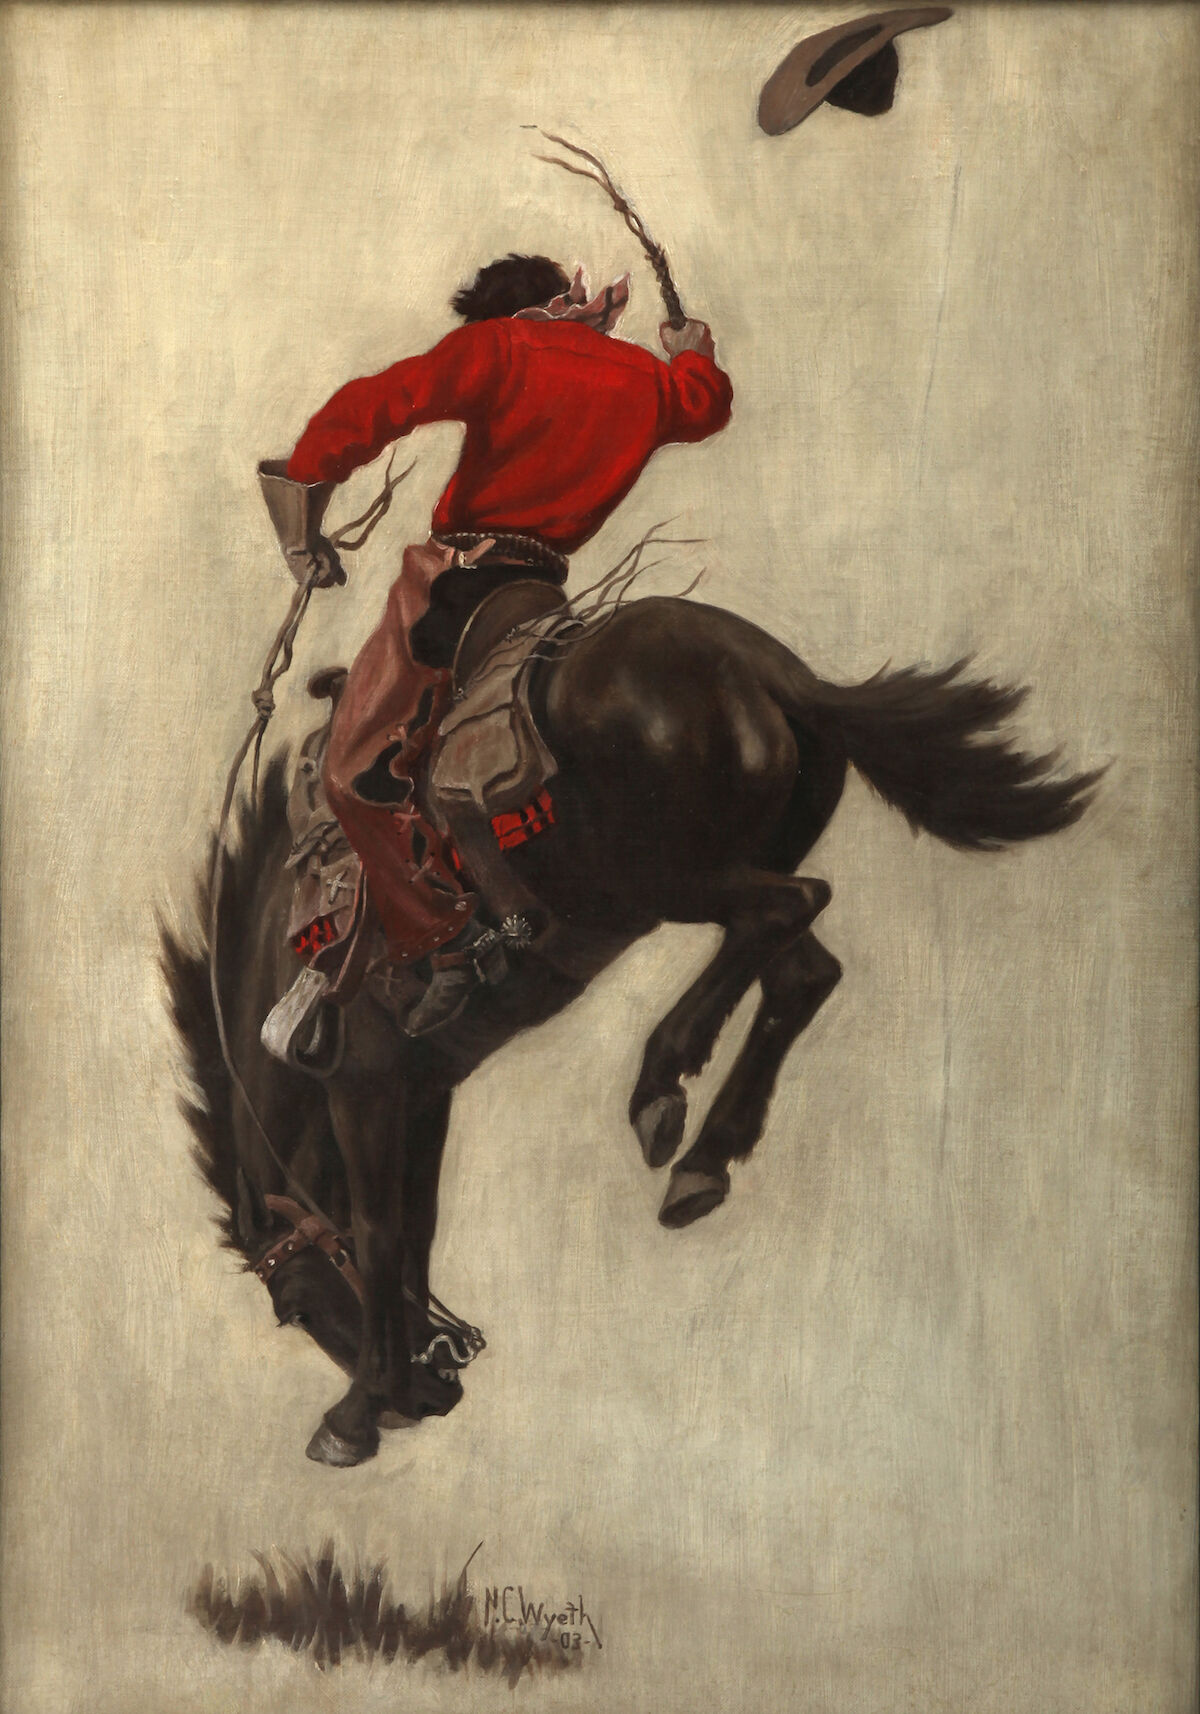 N. C. Wyeth, Saturday Evening Post, cover (Bucking Bronco), 1903. Courtesy of the Brandywine River Museum of Art. 